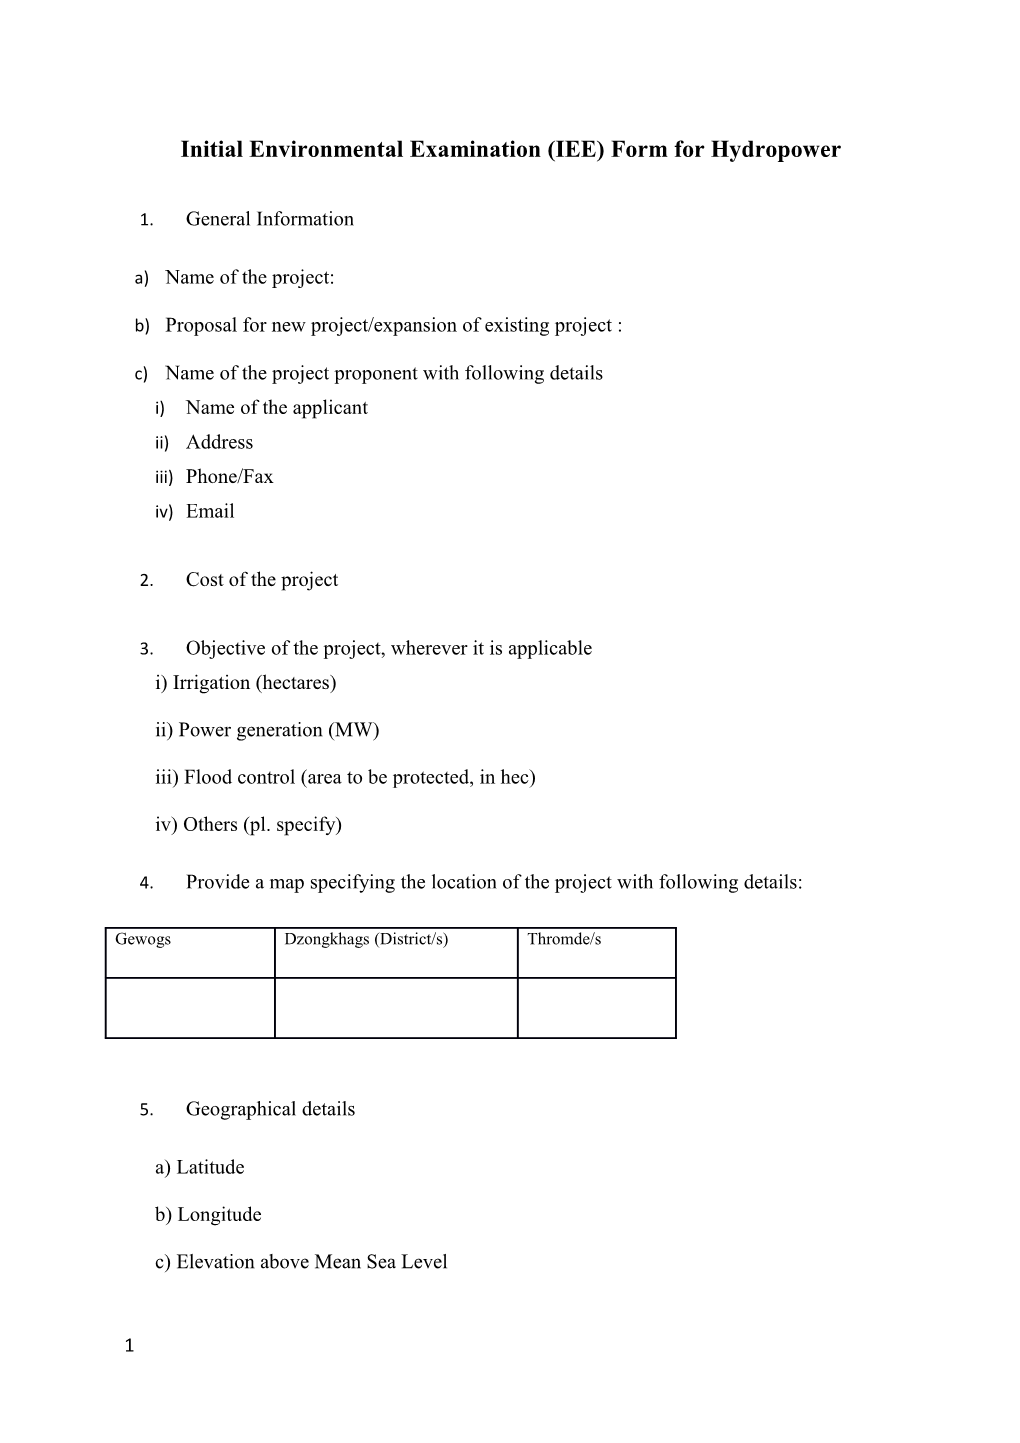 Initial Environmental Examination (IEE) Form for Hydropower